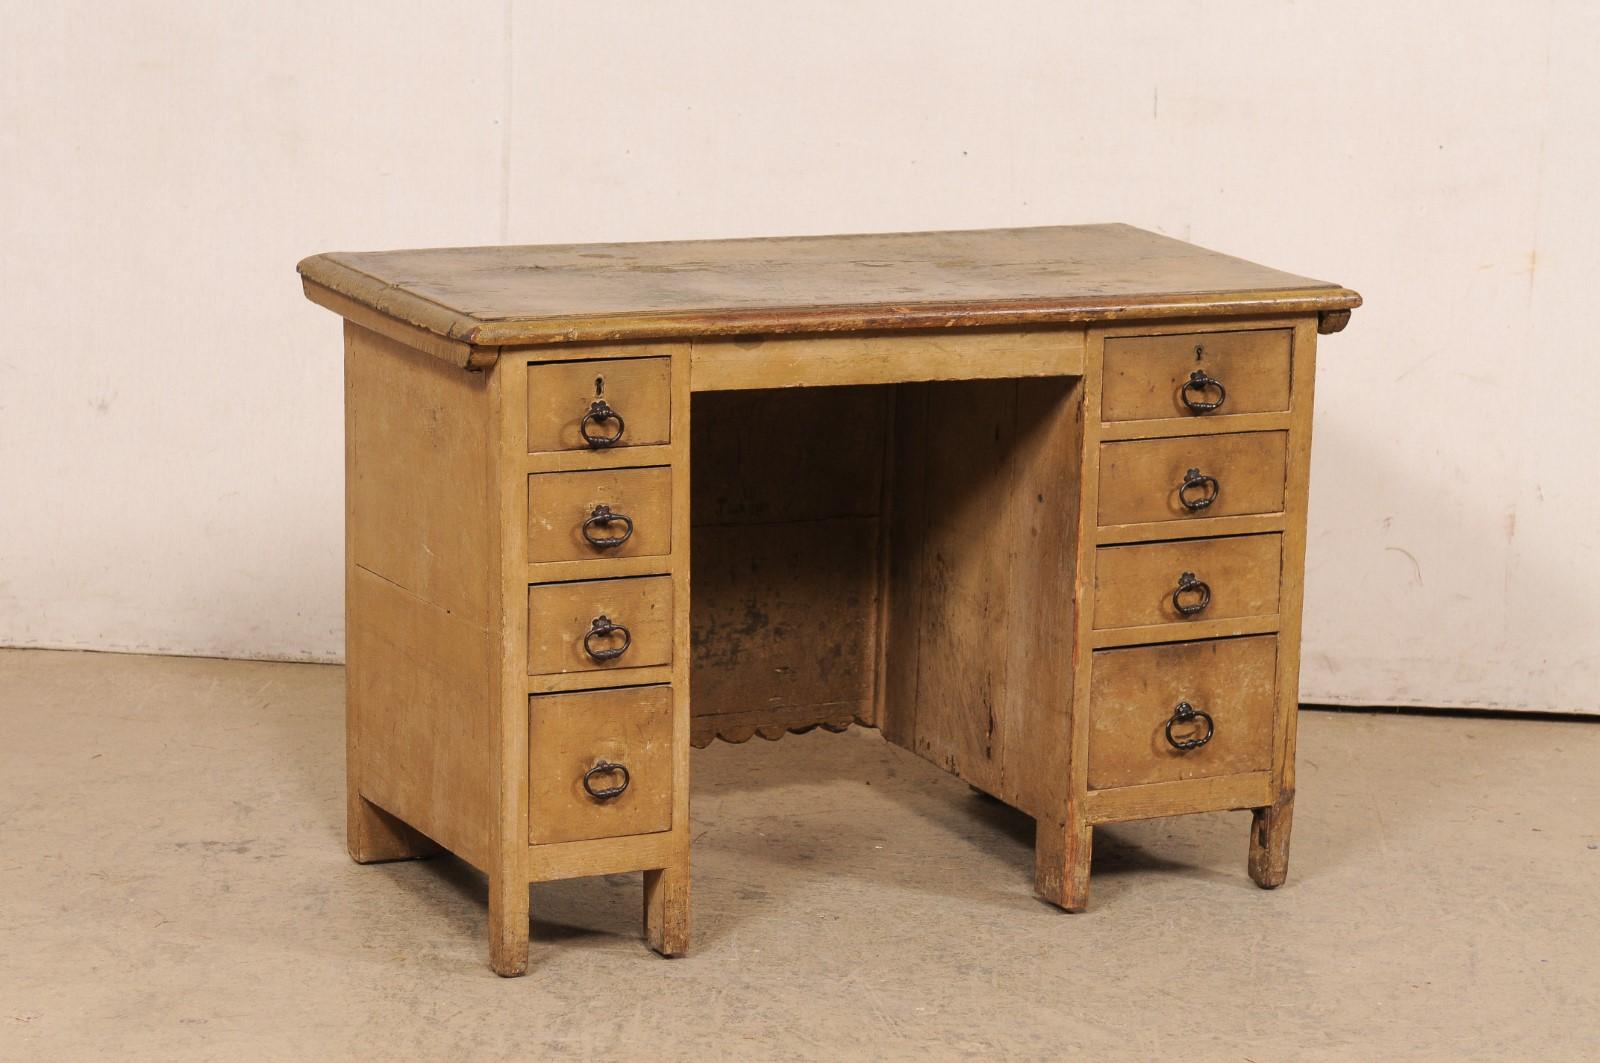 A Spanish smaller-sized wood desk, with a trunk-like appearance from front, from the early 20th century. This antique desk from Spain features a nicely carved front side, filled with square and circular medallions framing flower heads set into a